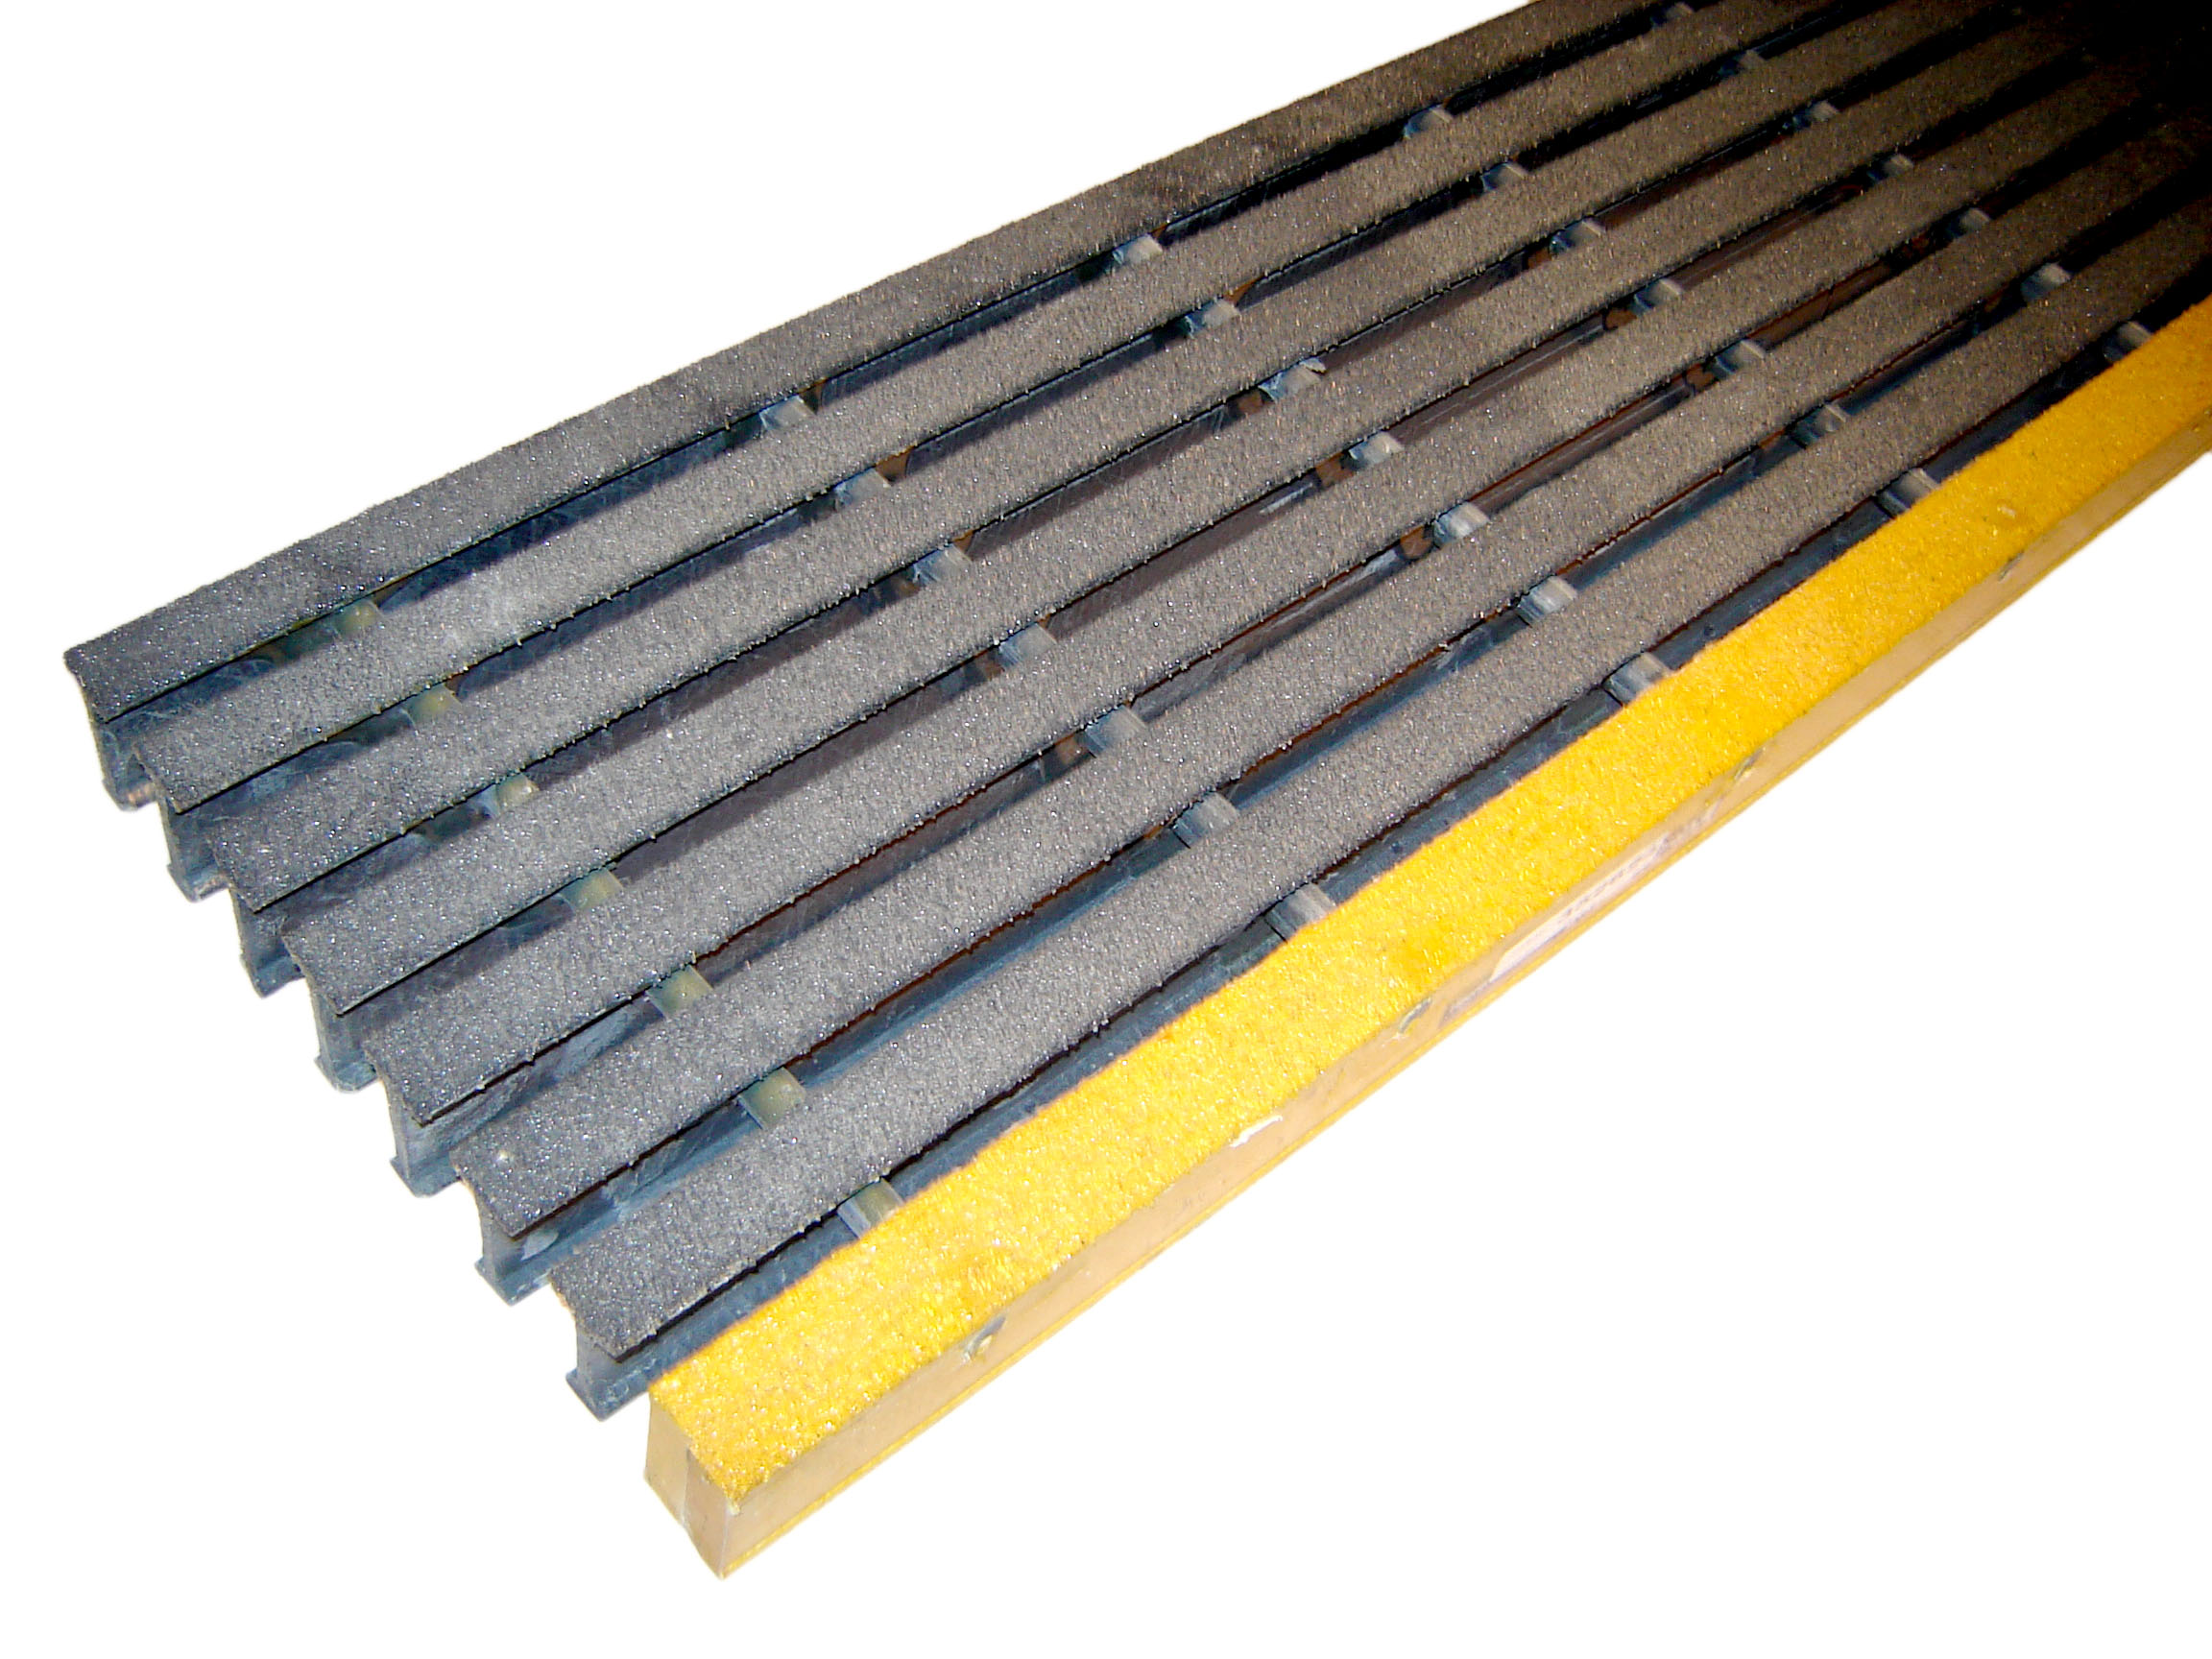 "F R P" Pultruded Stair Treads, "G R P" Steps